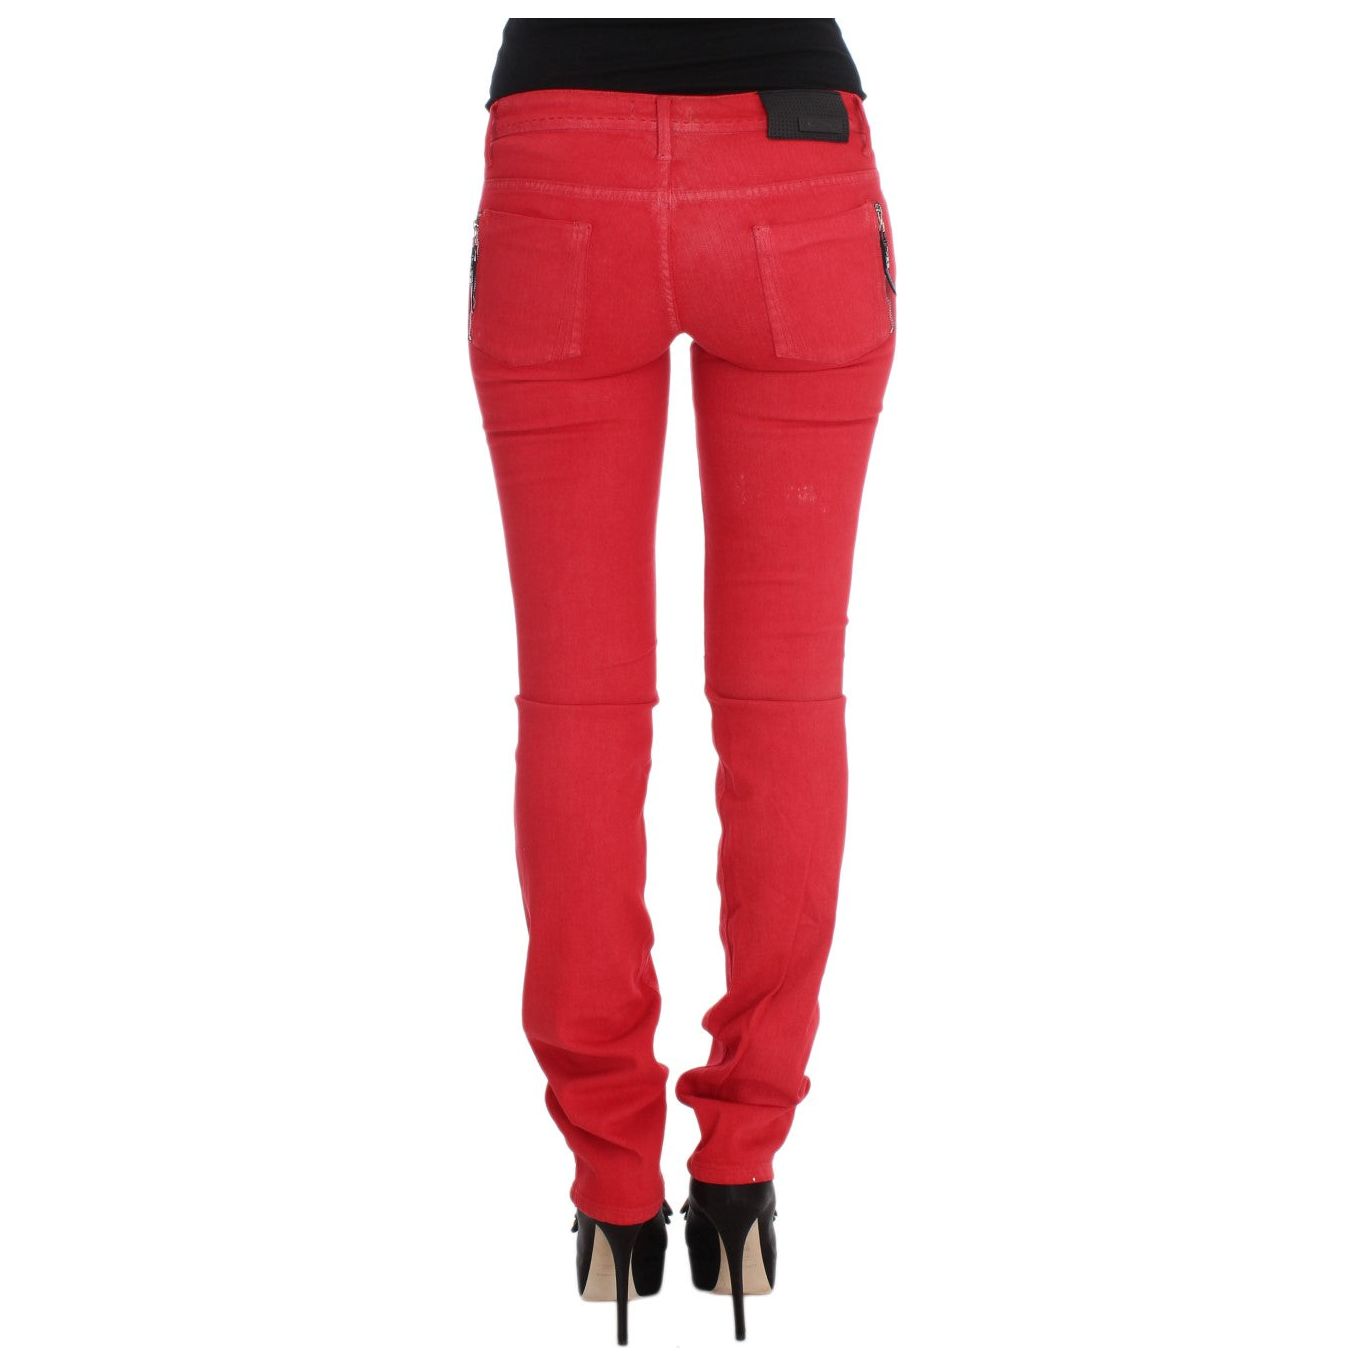 Chic Red Slim Fit Jeans